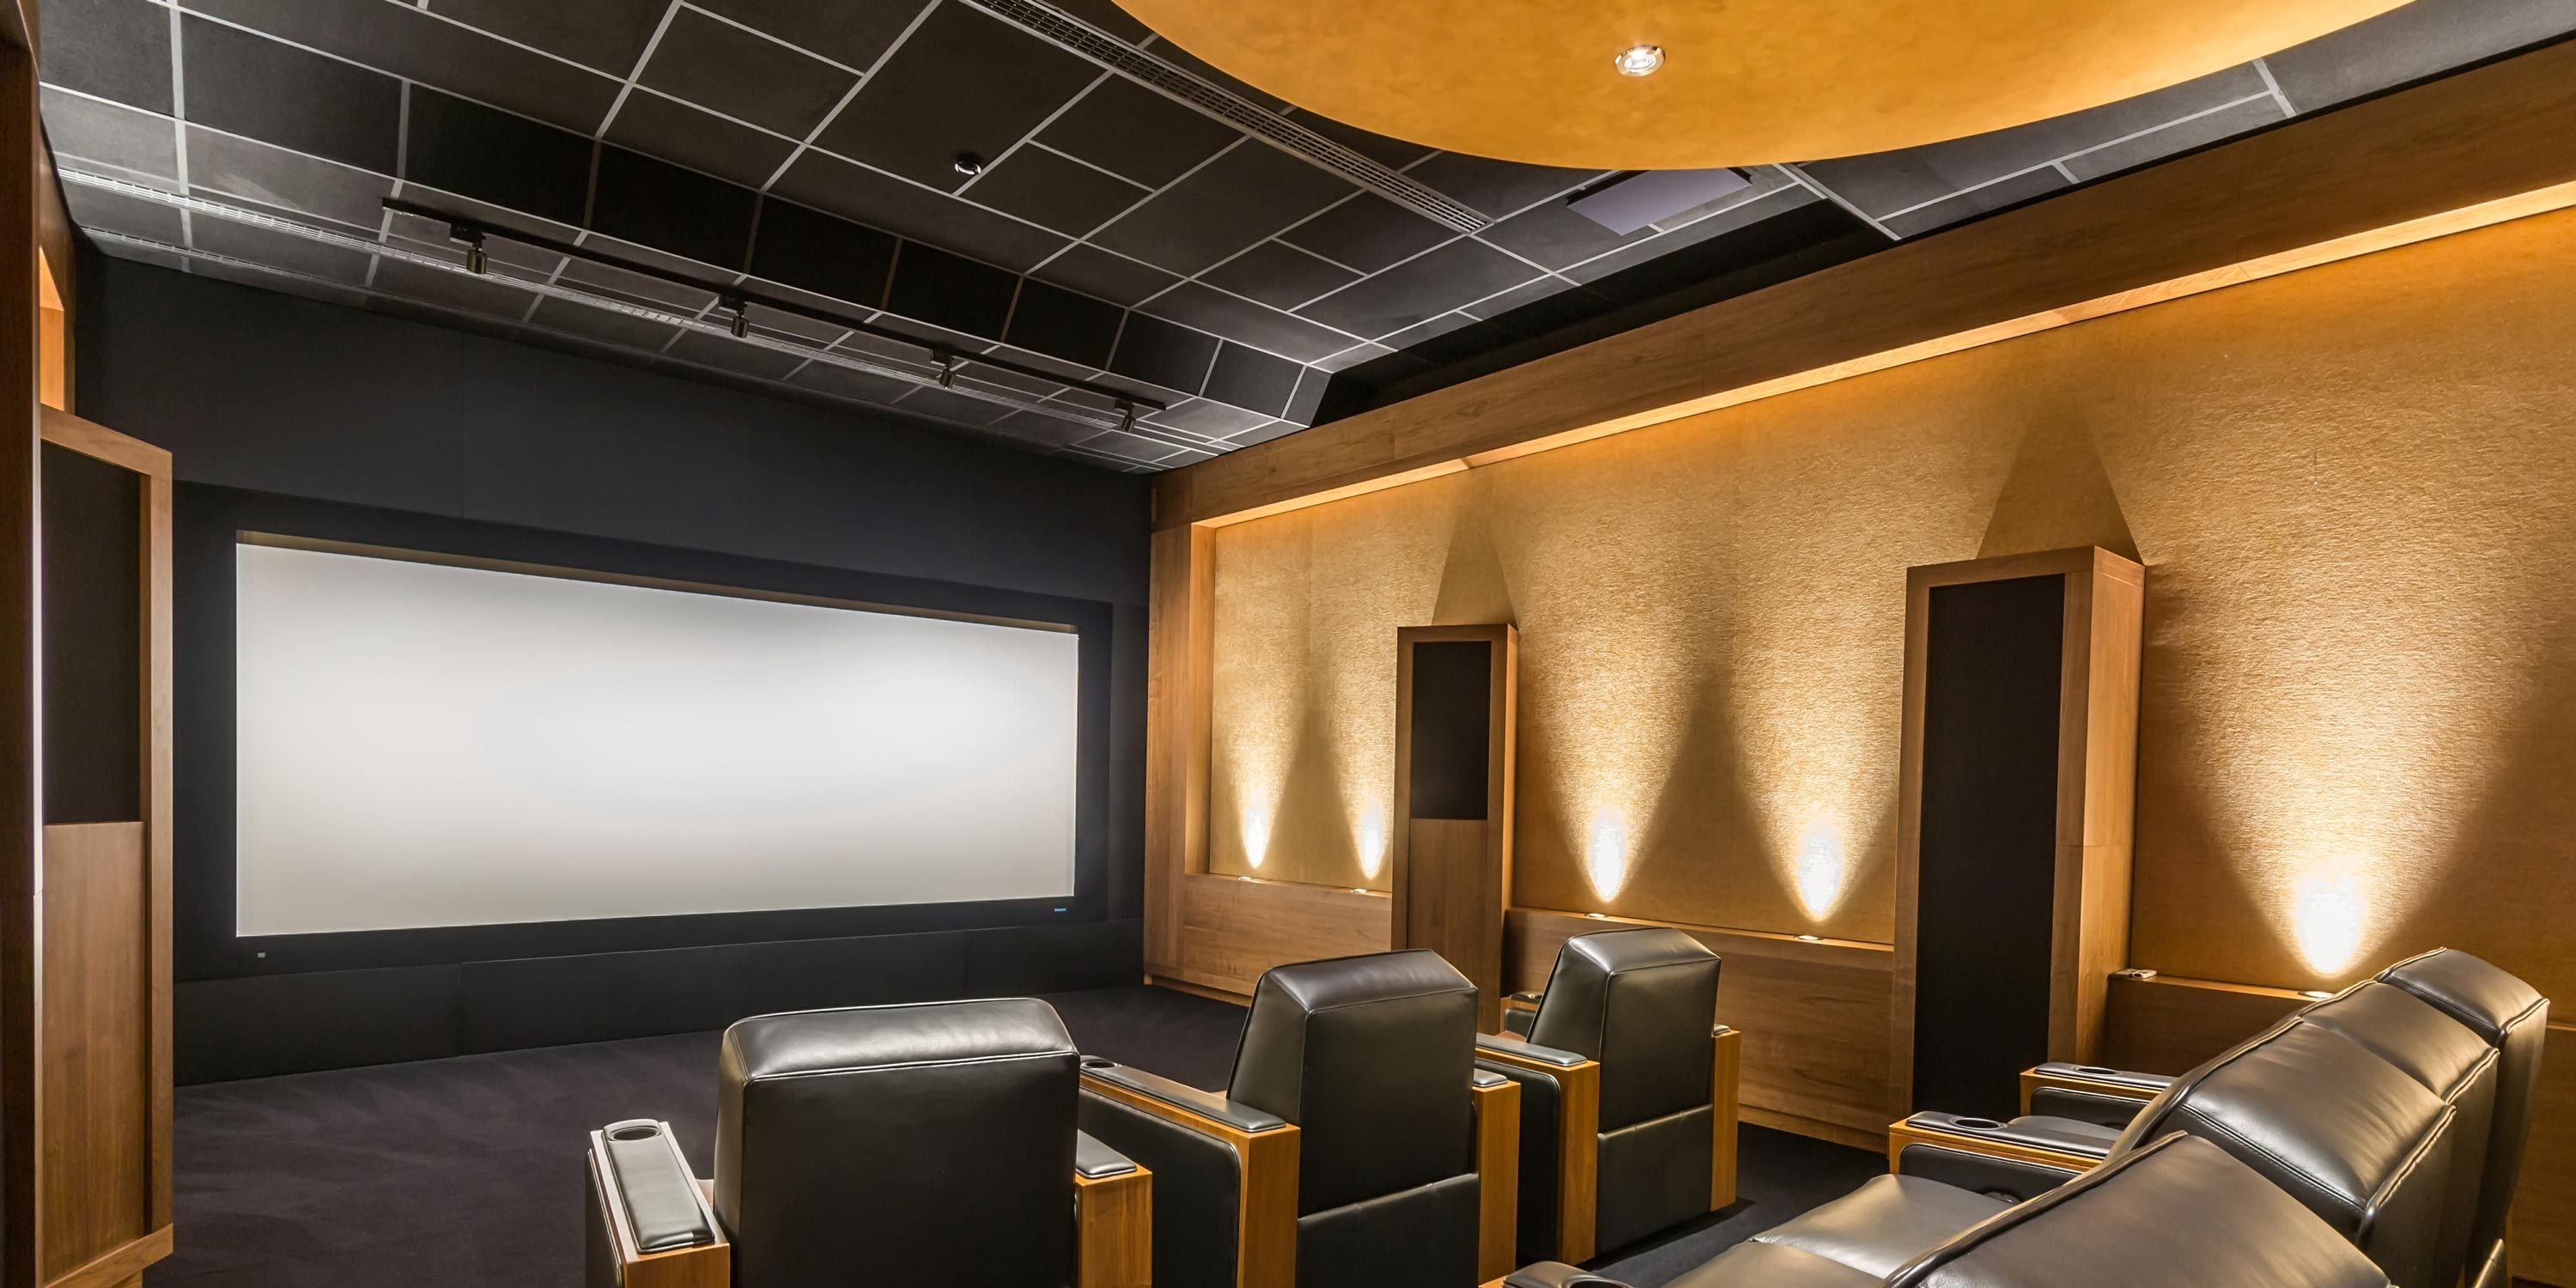 condo theater with yellow walls and grey ceiling